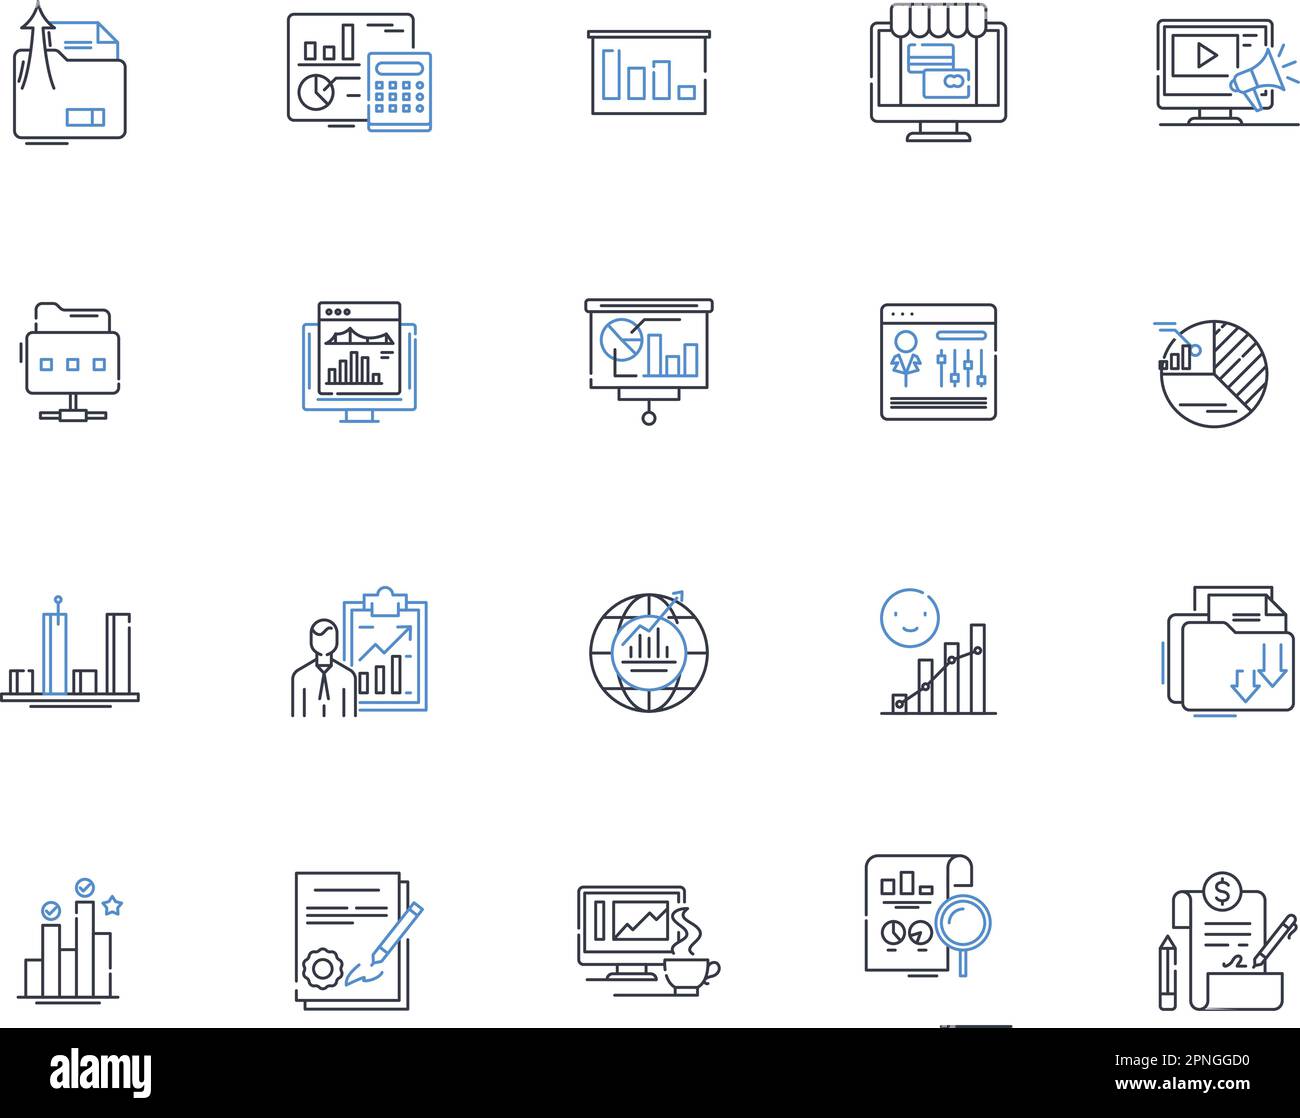 Data analysis tool line icons collection. Analytics, Insights, Intelligence, Visualization, Mining, Clustering, Segmentation vector and linear Stock Vector